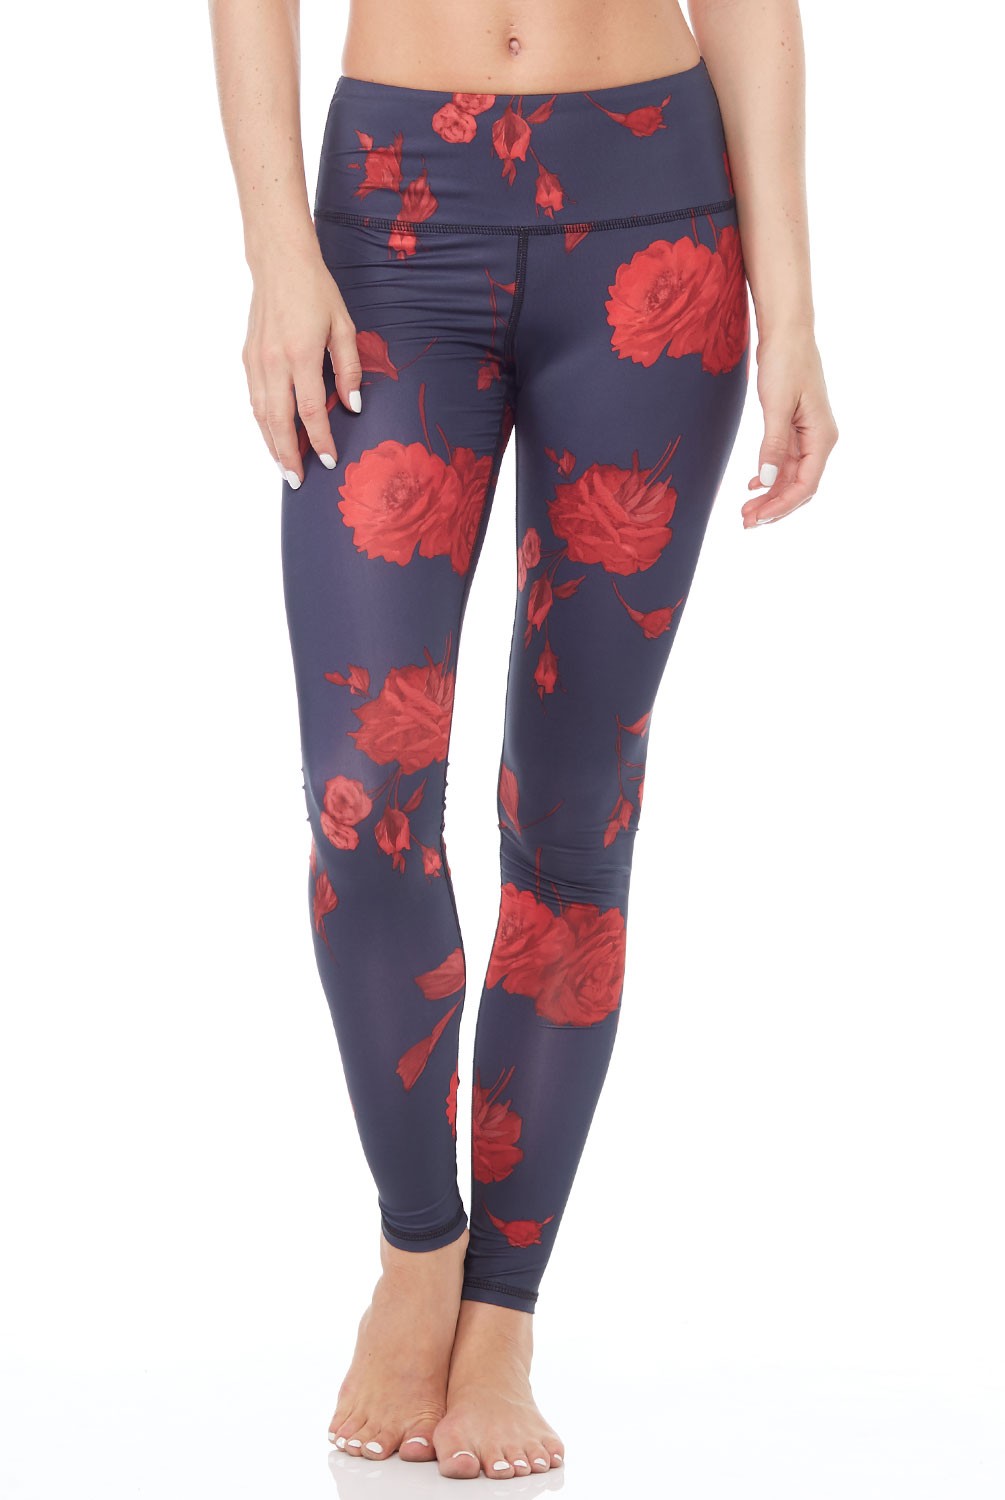 Miraflores Embroidered Legging - Stretchy Cotton Embroidered Legging